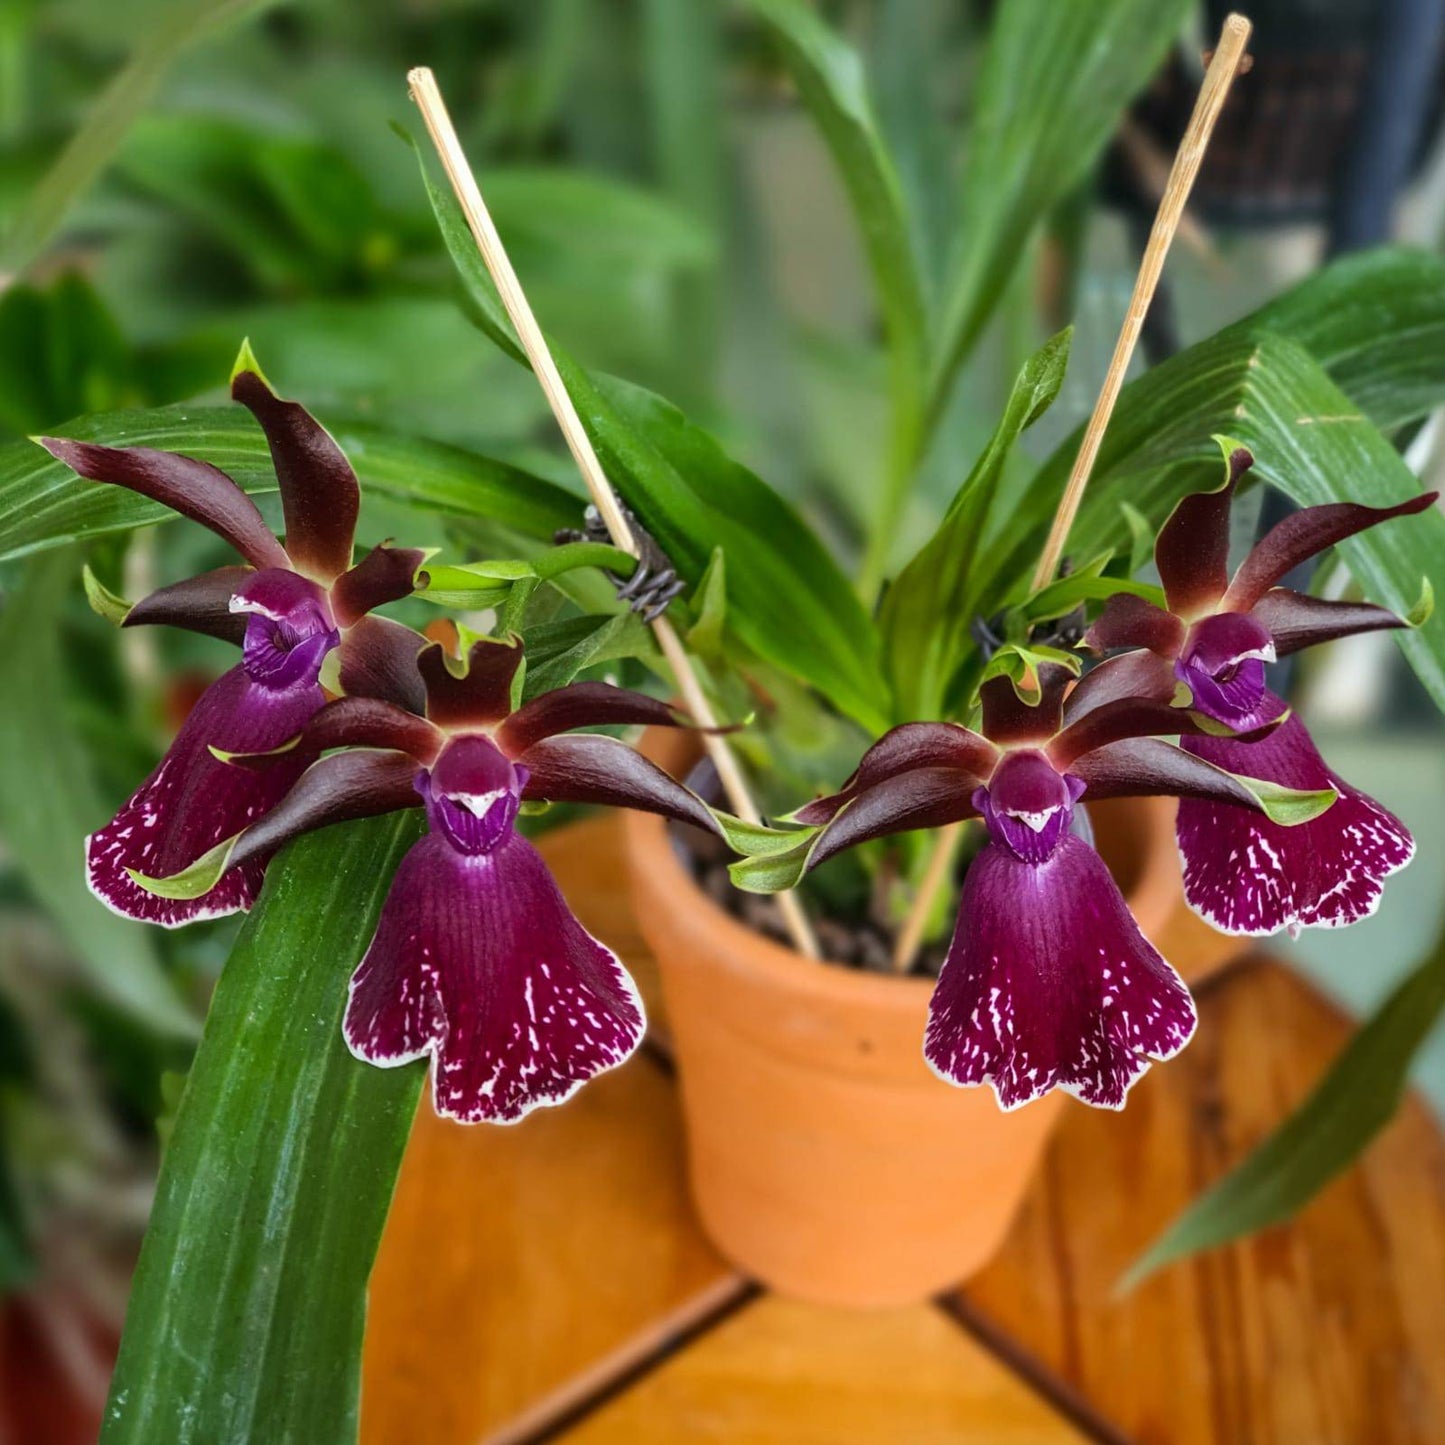 Zygolum Louisendorf 'Rhein Moonlight' - Without Flowers | BS - Buy Orchids Plants Online by Orchid-Tree.com